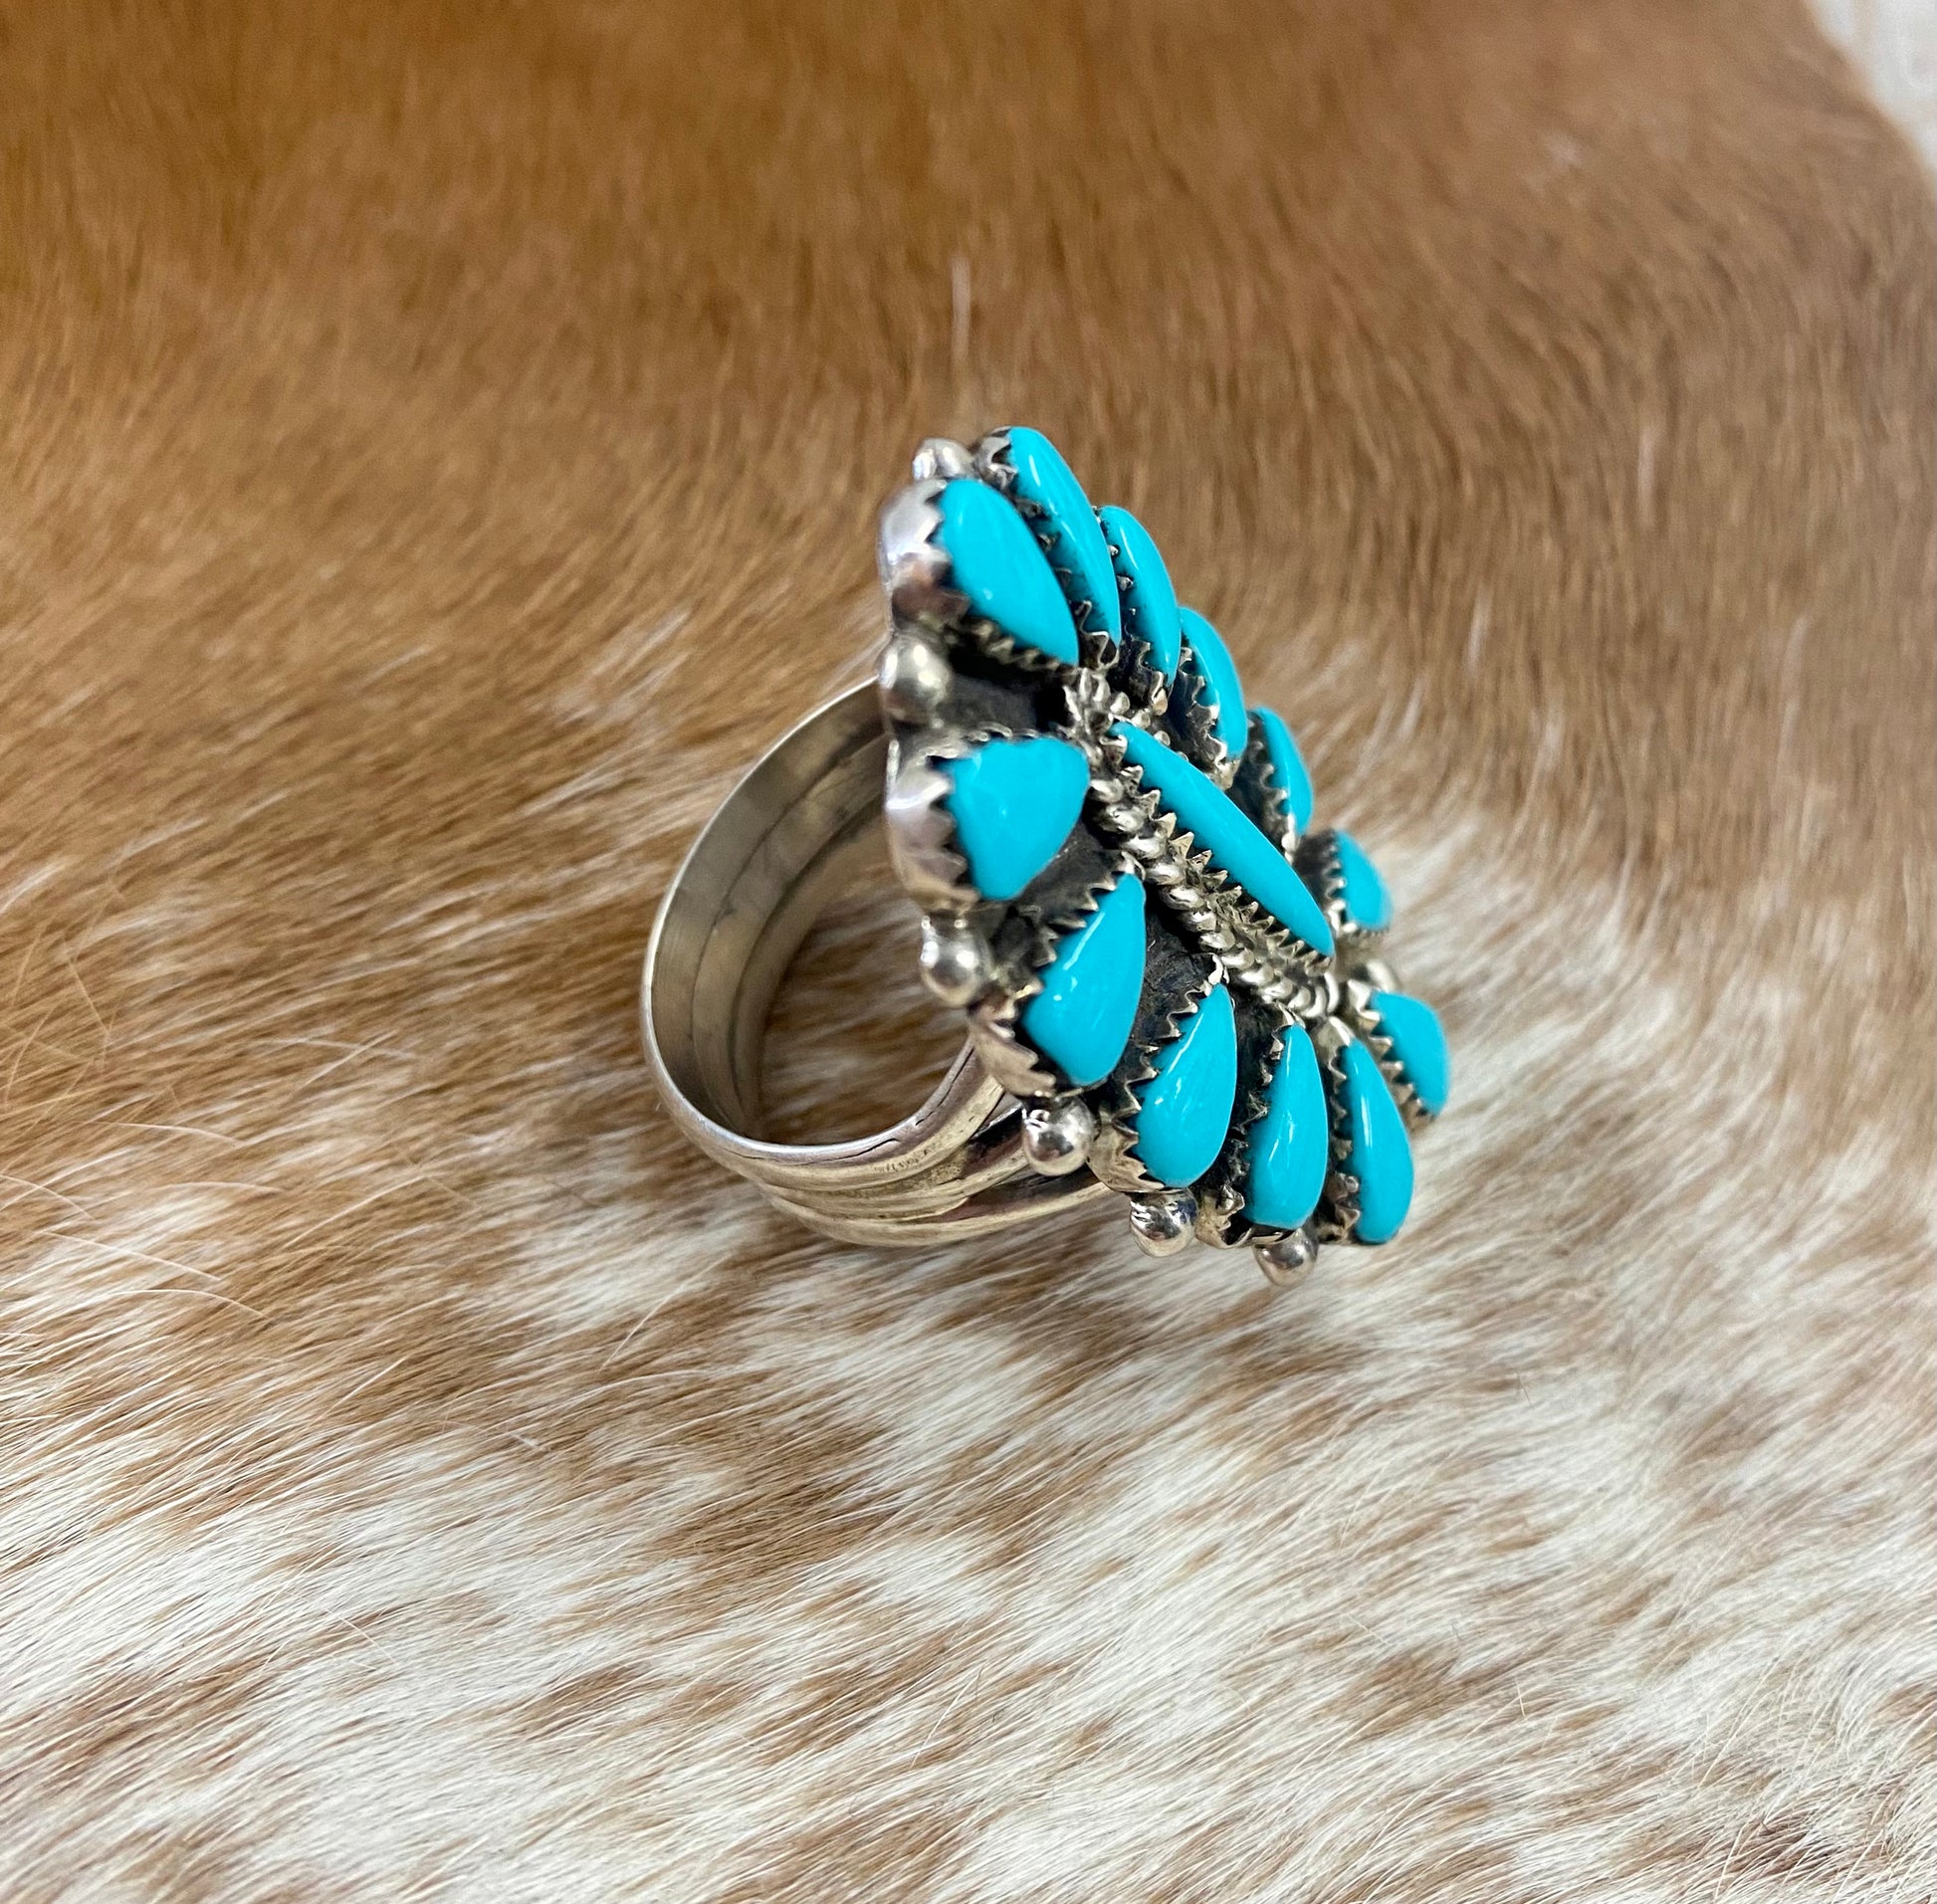 Sleeping Beauty turquoise traditional cluster sterling silver ring. Stamped sterling and signed on the back by a Zuni Native American artist silversmith. Available in size 12 1/2. The perfect piece to add to your accessory wardrobe and jewelry collection.   Size: 1.5 Inches Length X 1” Inch Width    Stone: Sleeping Beauty Turquoise   Signed: YES 